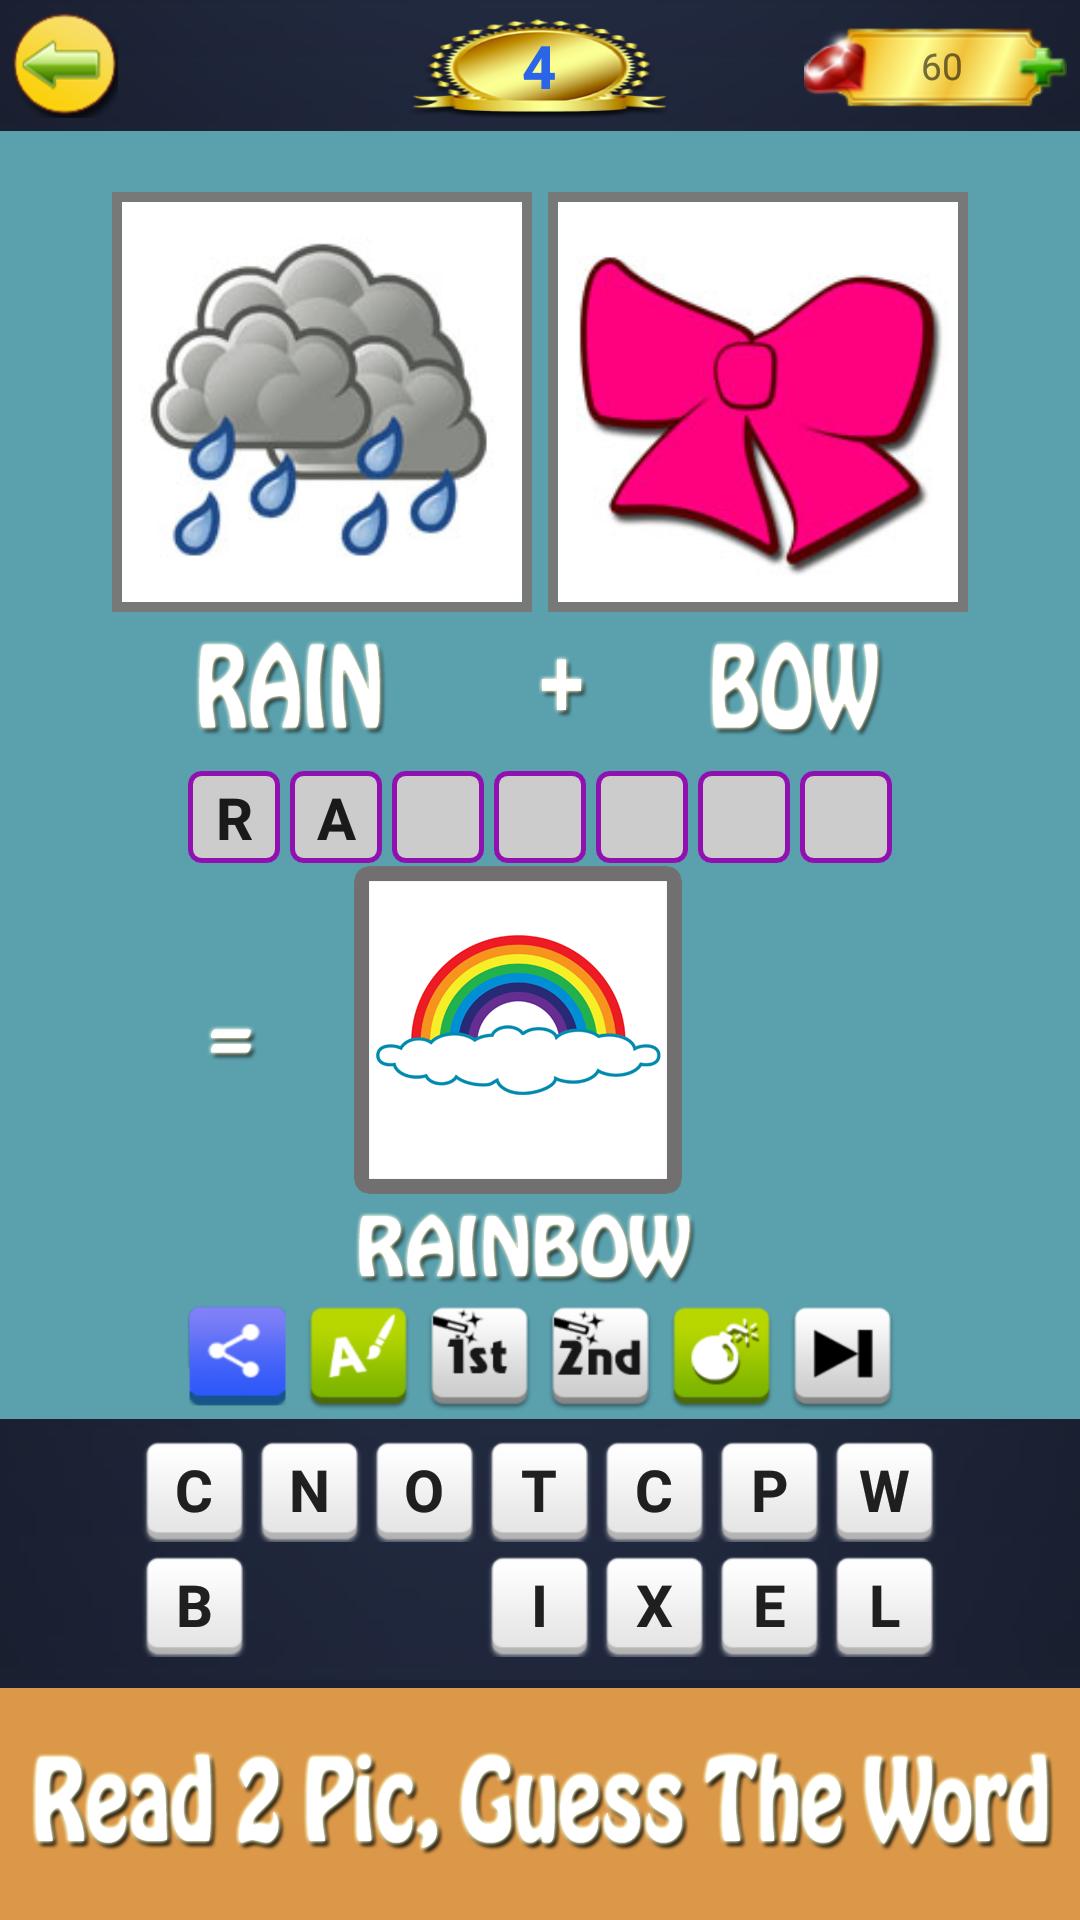 Pics To Word - 2 Pics 1 Word – Fun Word Guessing for Android - APK Download